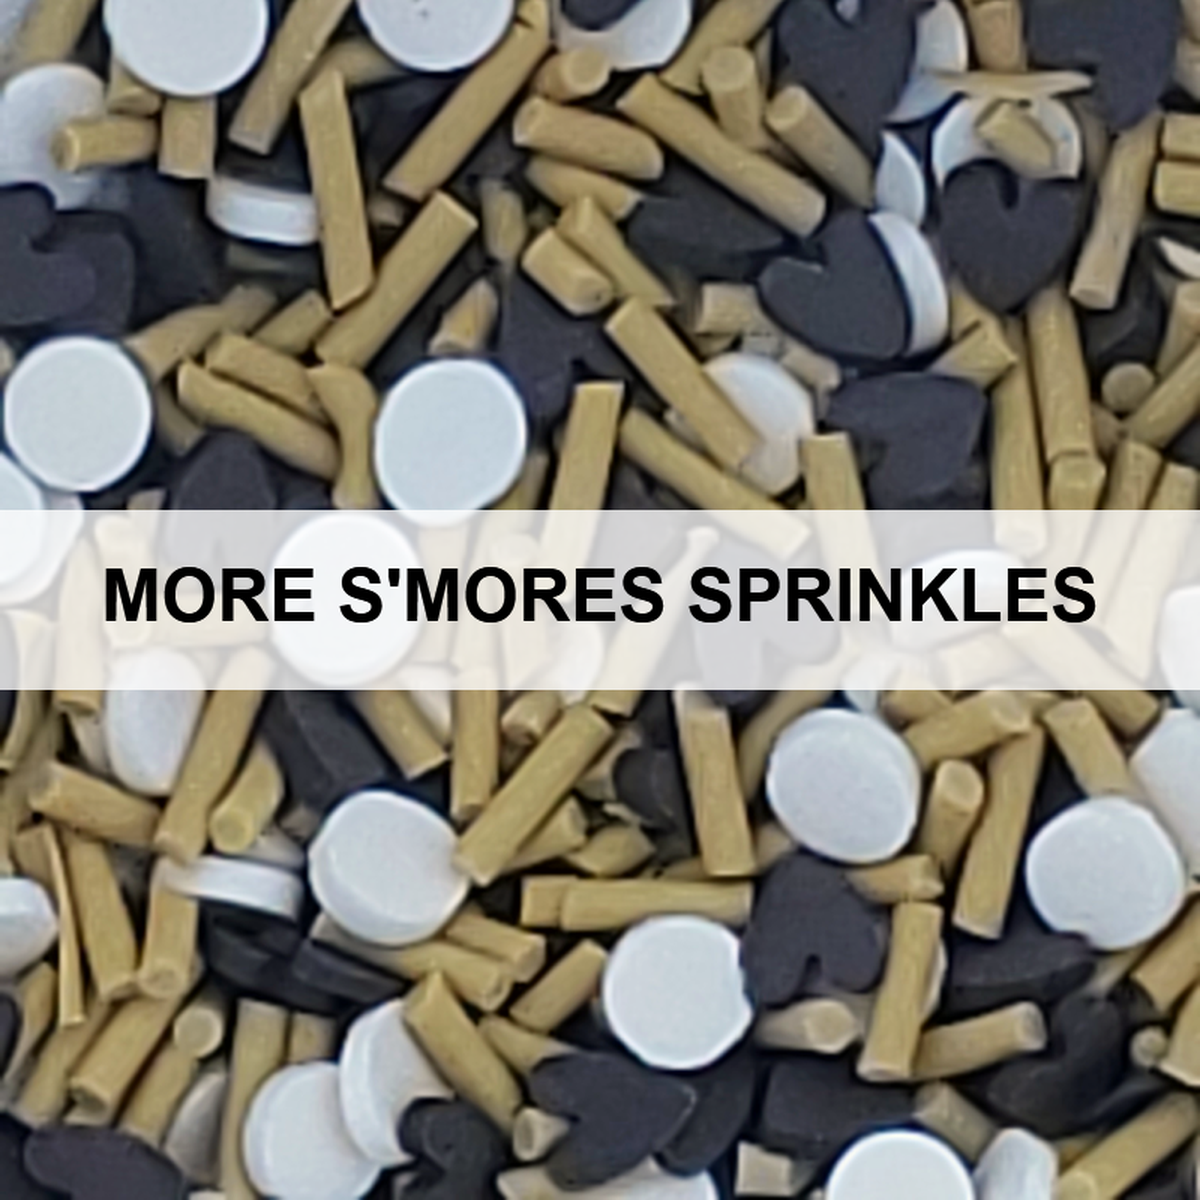 More S'mores Sprinkles by Kat Scrappiness - Kat Scrappiness